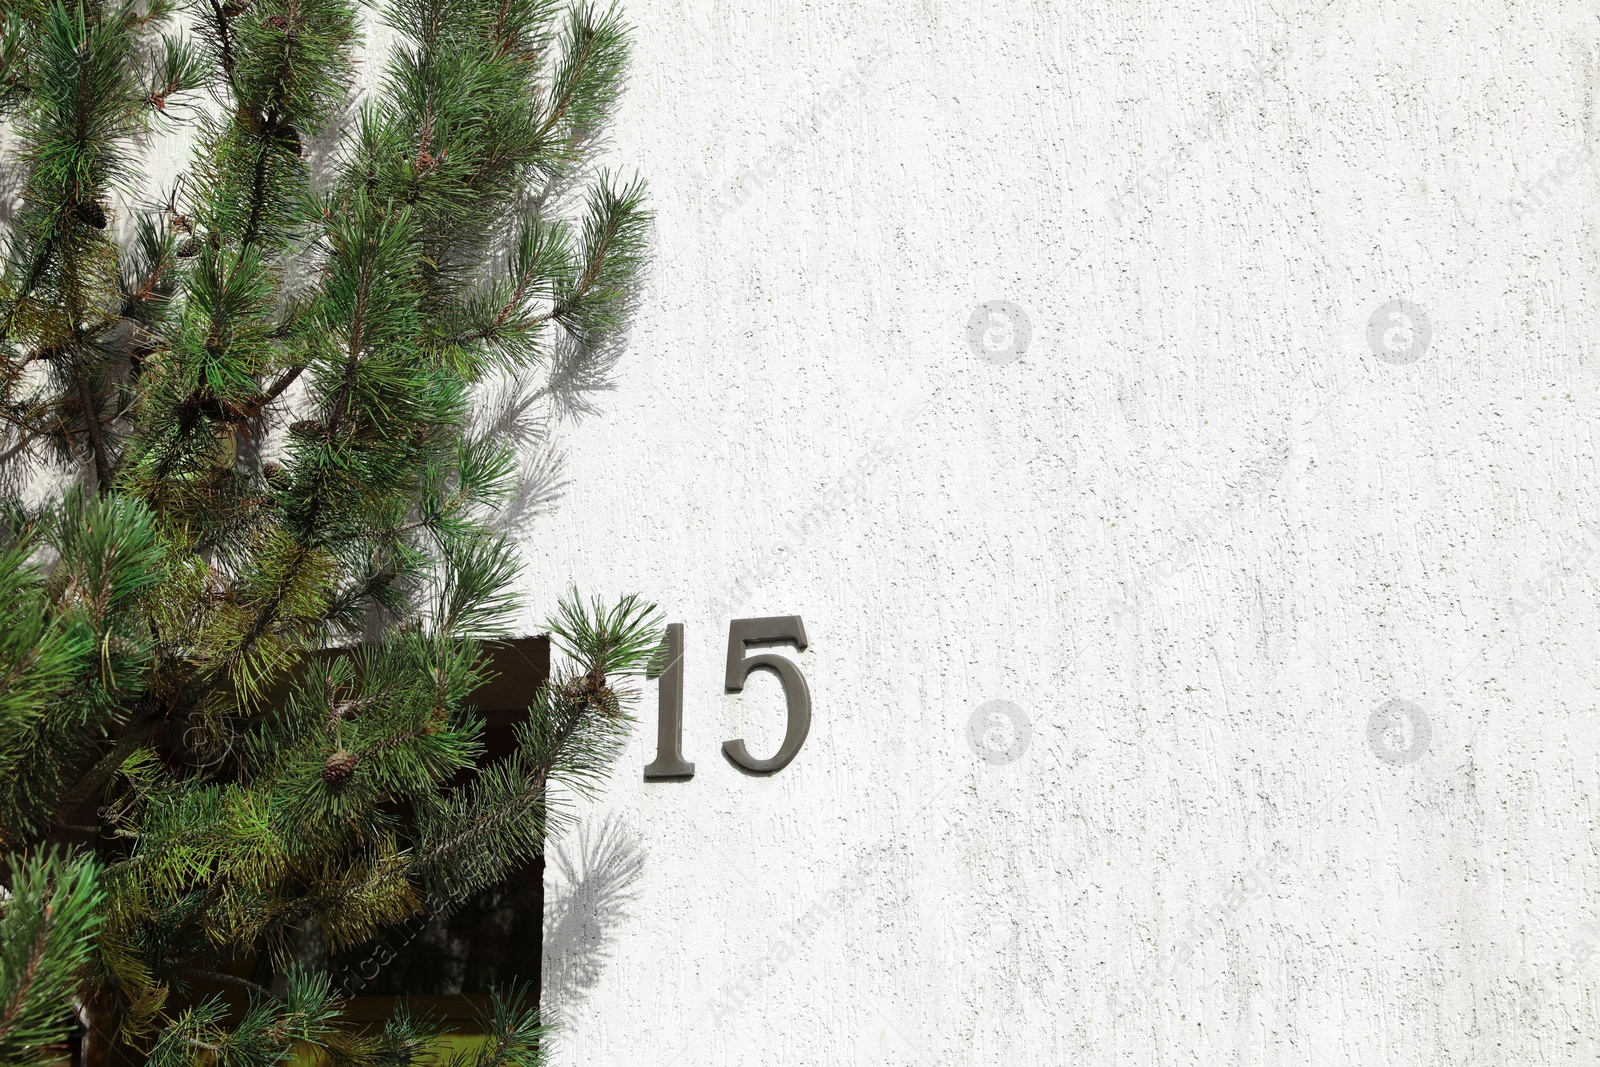 Photo of House number 15 on white textured wall outdoors. Space for text